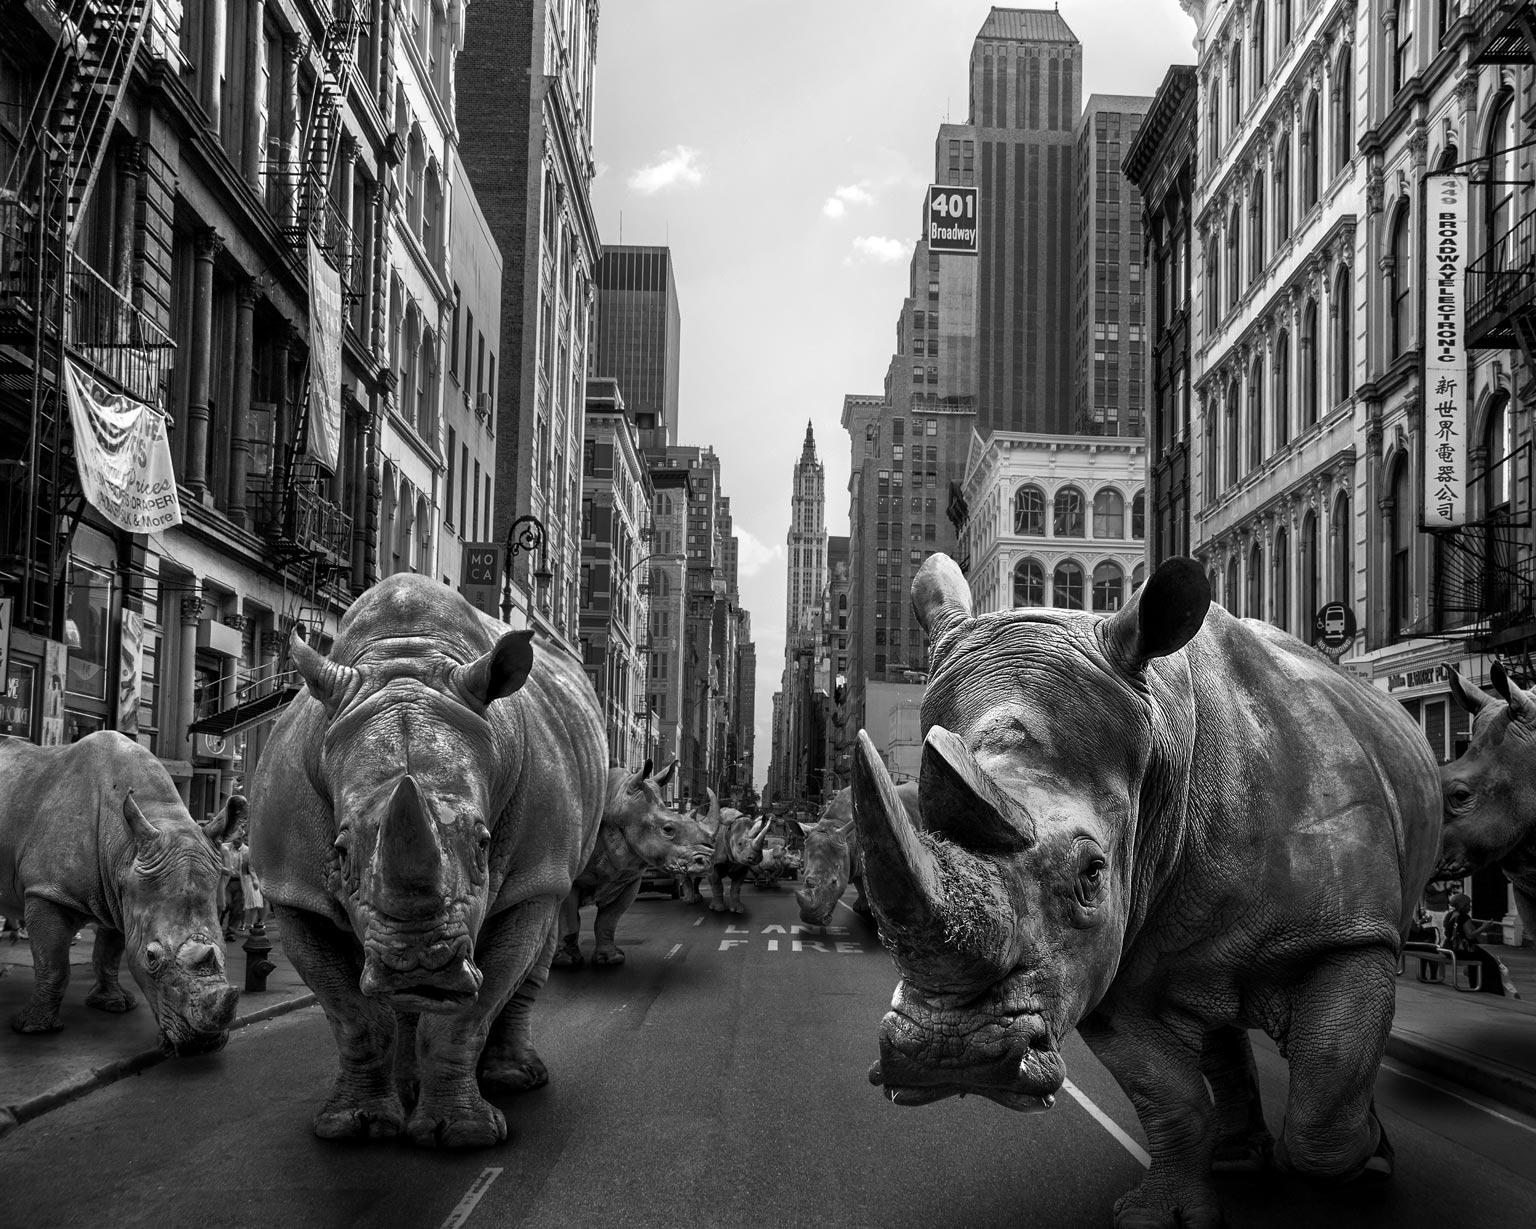 Limited Ed. Print Artwork titled ‘Rhinos at home in New York’ by Gillie and Marc - Photograph by Gillie and Marc Schattner